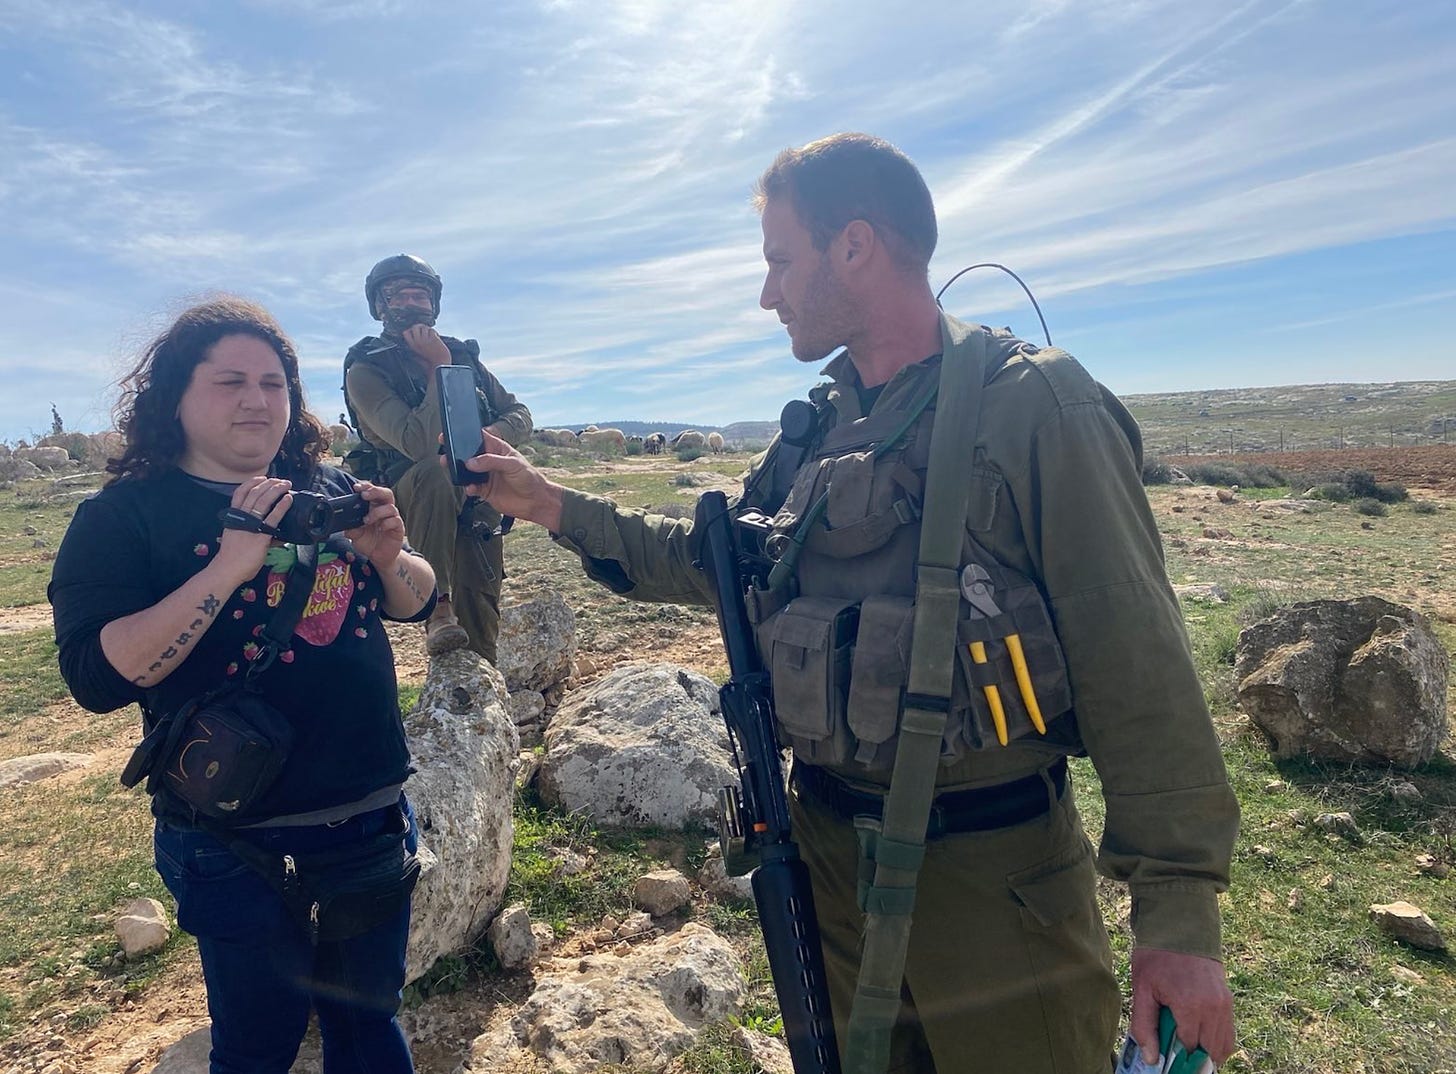 Photo of the interviewee with a camcorder and an IDF solder holding a phone in her face